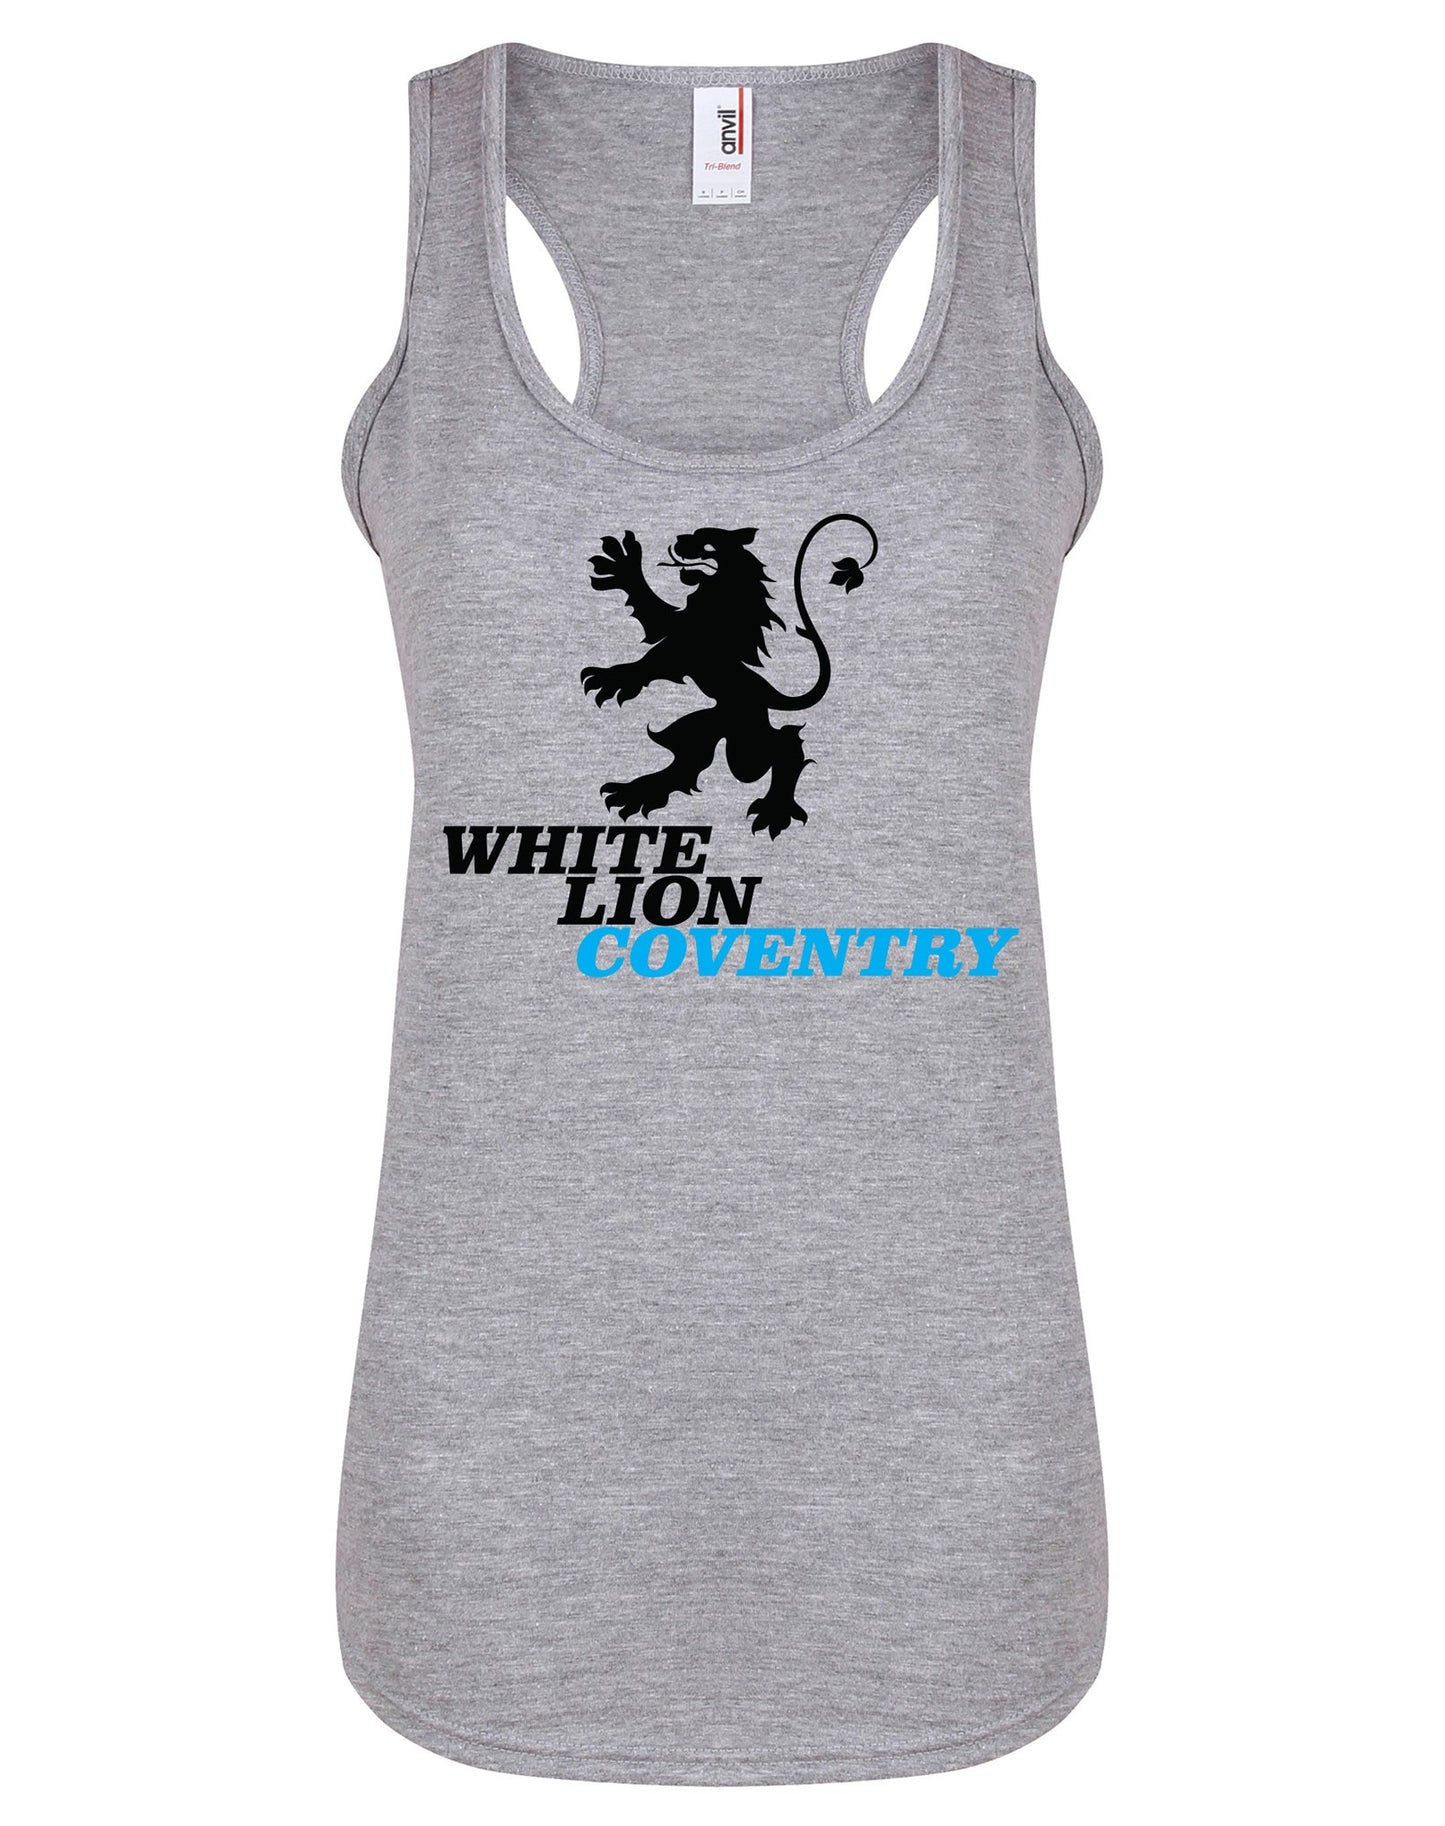 White Lion Coventry ladies fit vest - various colours - Dirty Stop Outs